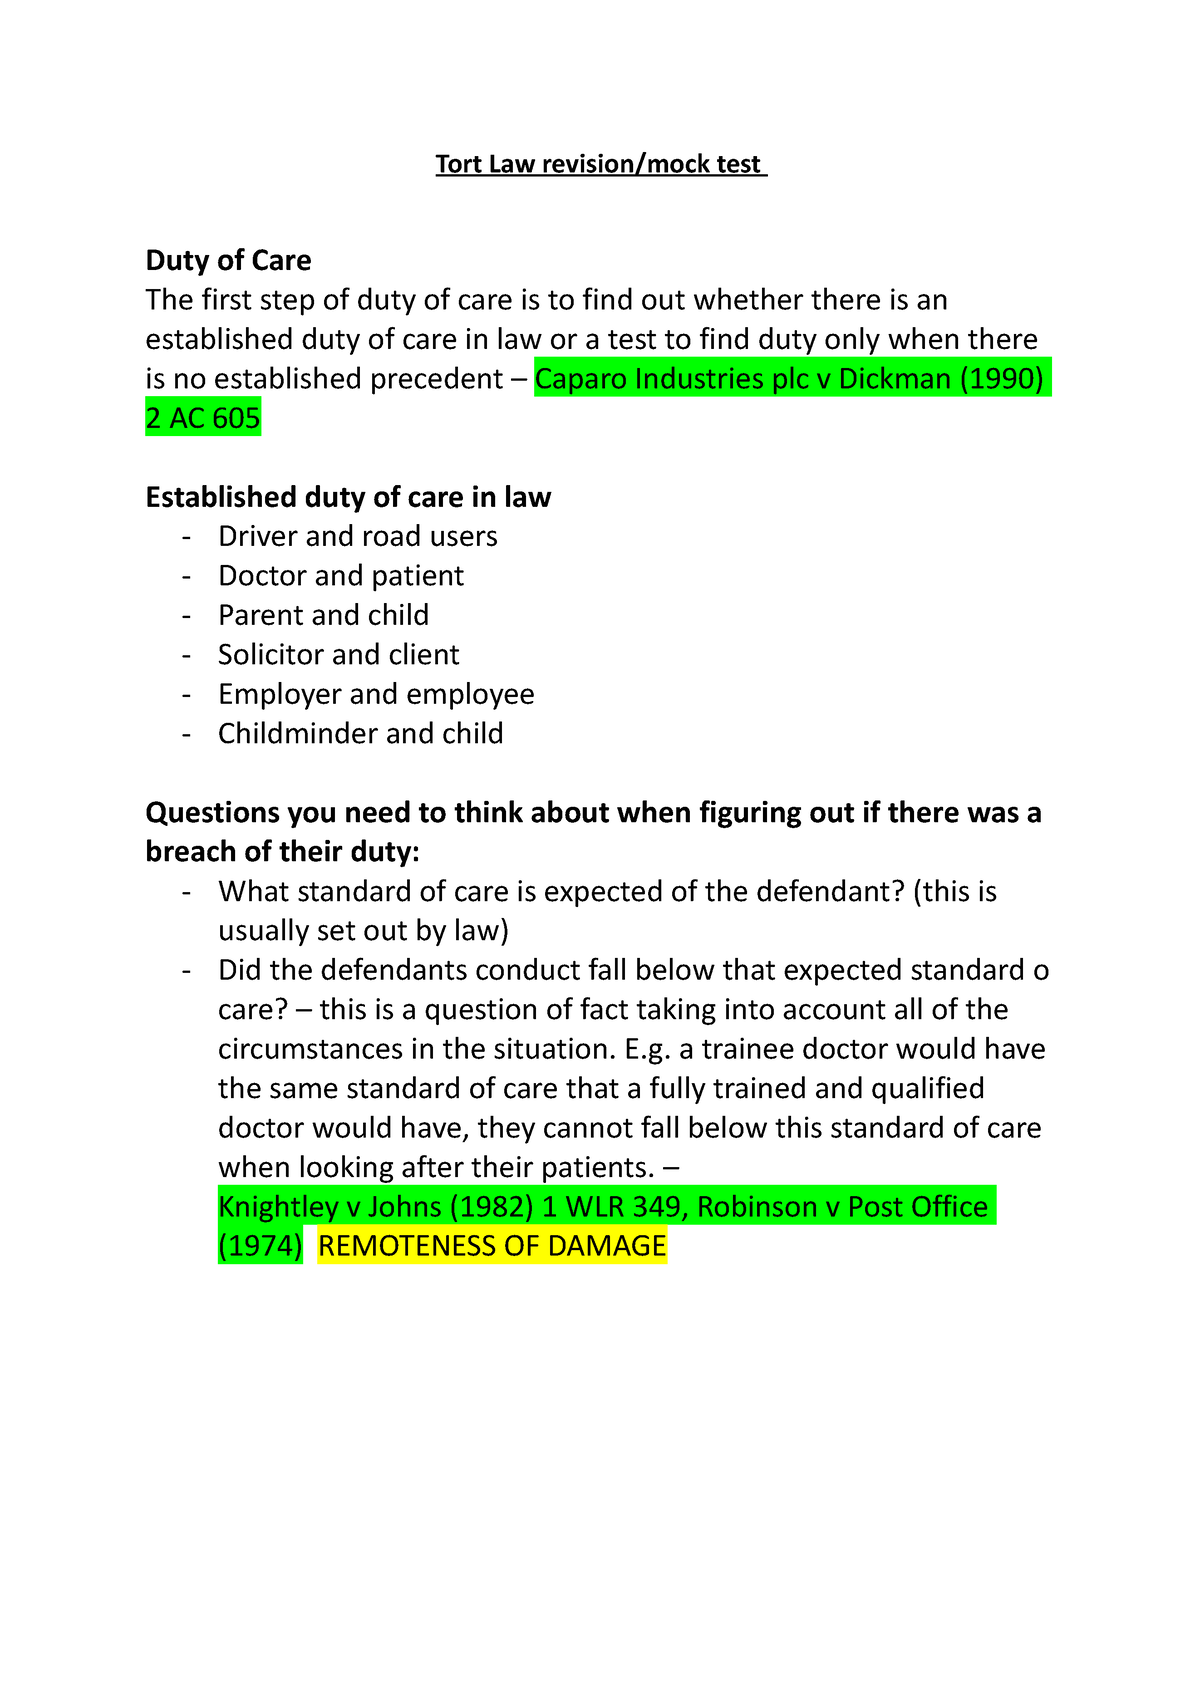 Tort Law Revision Tort Law Revisionmock Test Duty Of Care The First Step Of Duty Of Care Is 8904